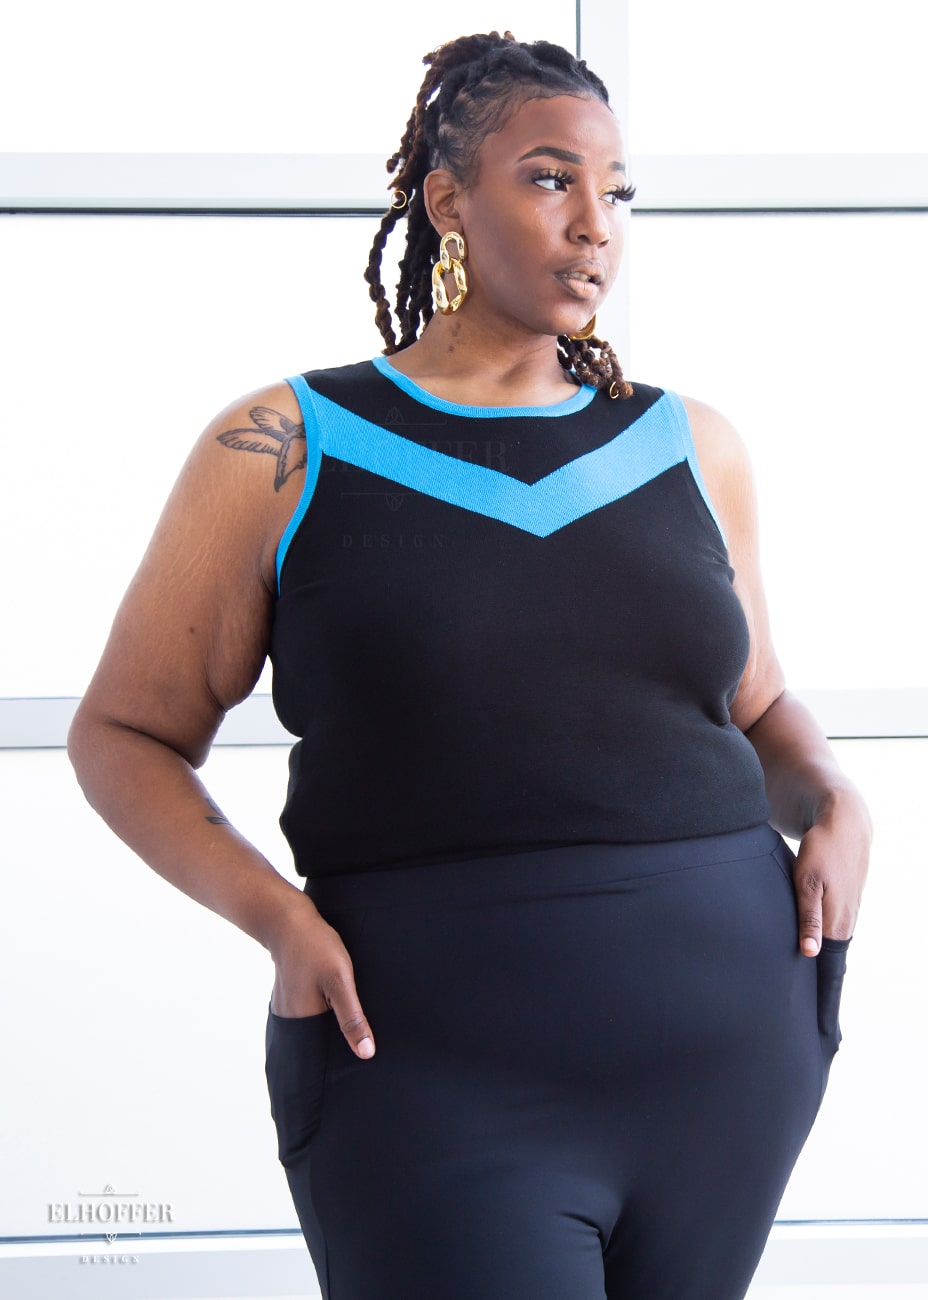 Myjah, a medium dark skinned 3xl model with shoulder length braids, is wearing a light weight sleeveless knit top.  The body of the top is mainly black with a bright teal chevron design across the chest and matching teal binding around the neckline and armholes.